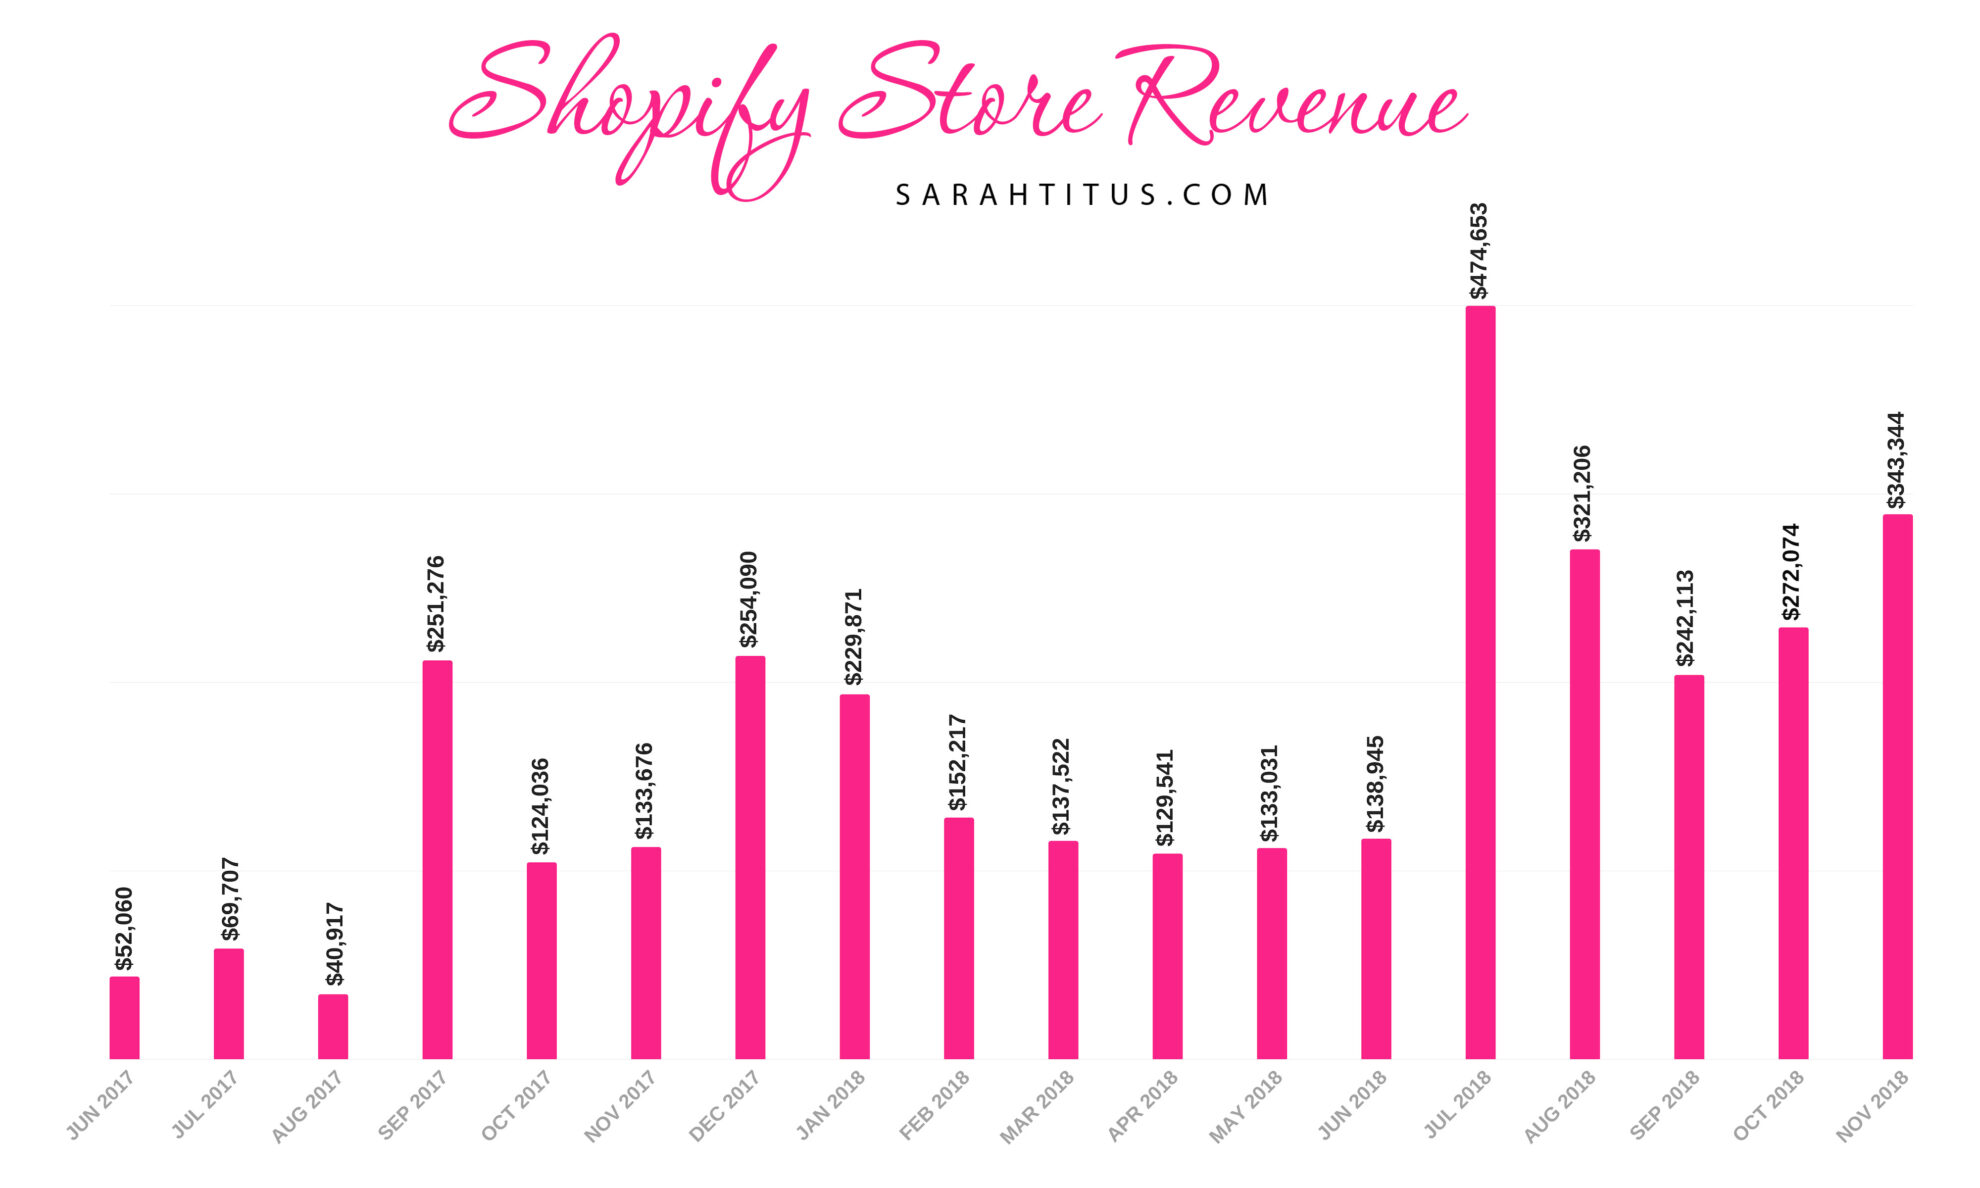 Is Shopify worth it? Considering I make $2.7 million/year in my Shopify store selling digital products on autopilot, I'd say HECK YAH! Check out my most recent income report. #shopifyincomereport #incomereport #isshopifyworthit #milliondollarshop